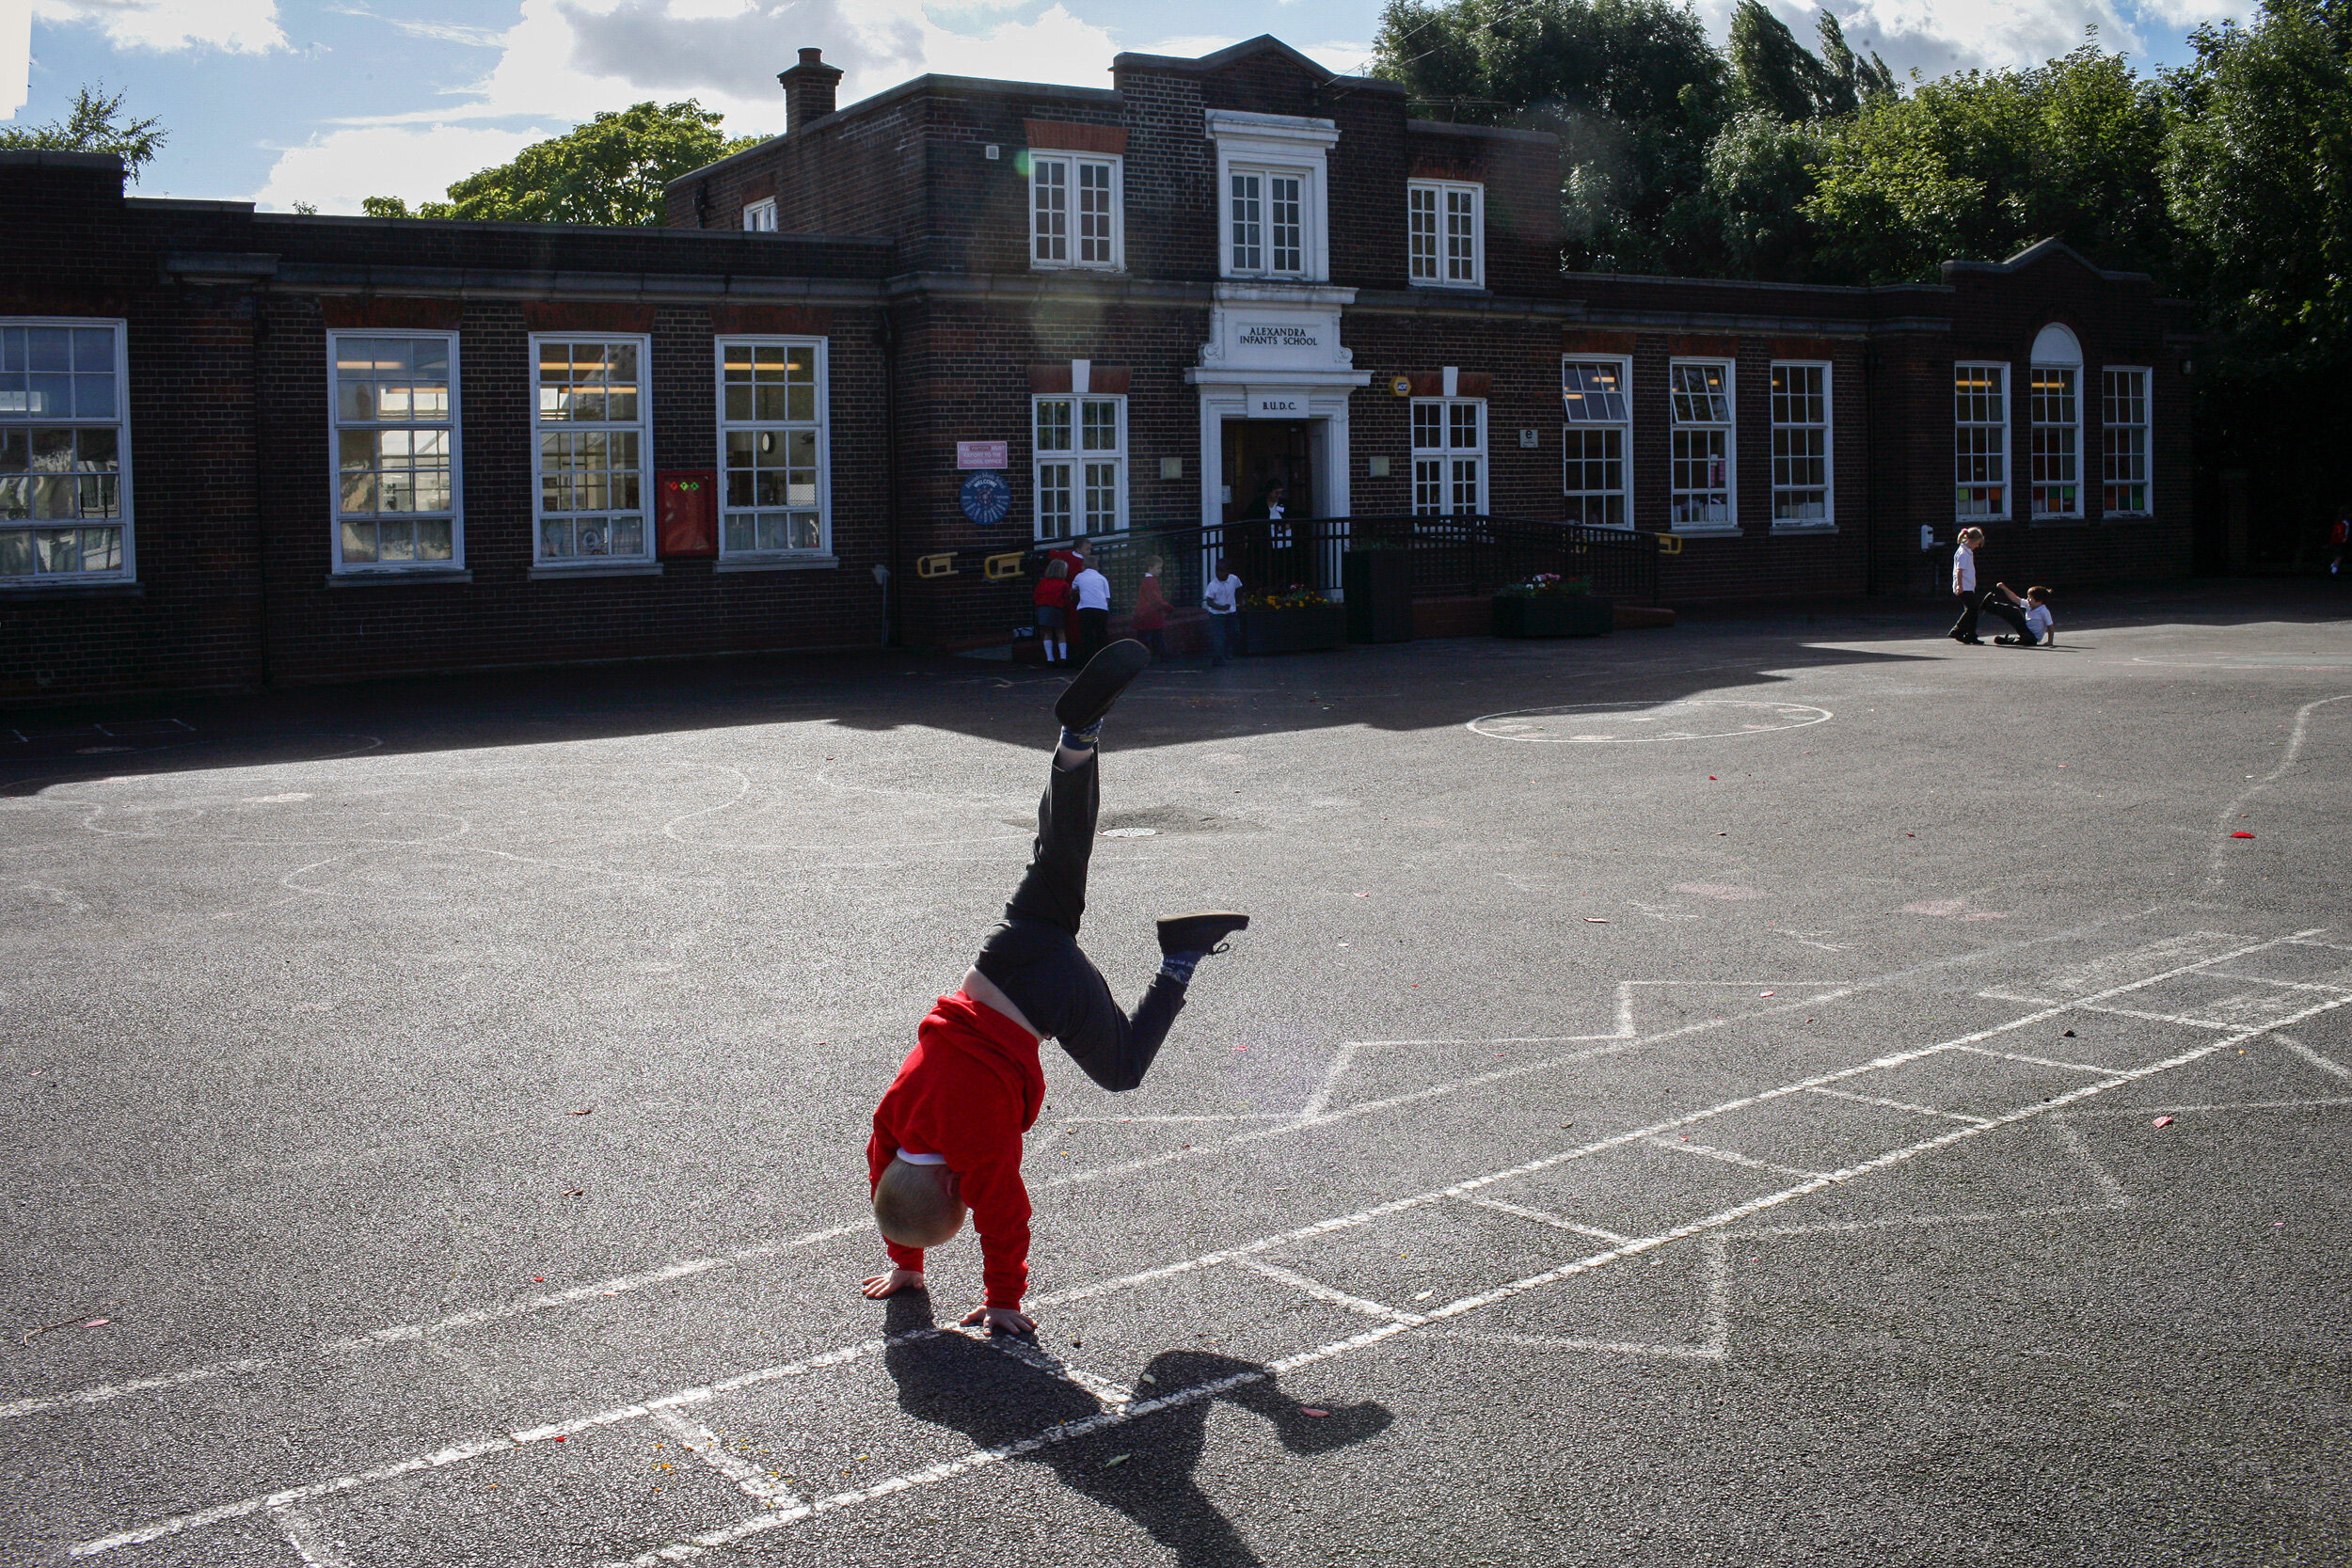  Alexandra Infant School, Bromley, Kent, UK.  Playground.  Shot by Eleanor Bentall, photographer, for The Daily Telegraph.  